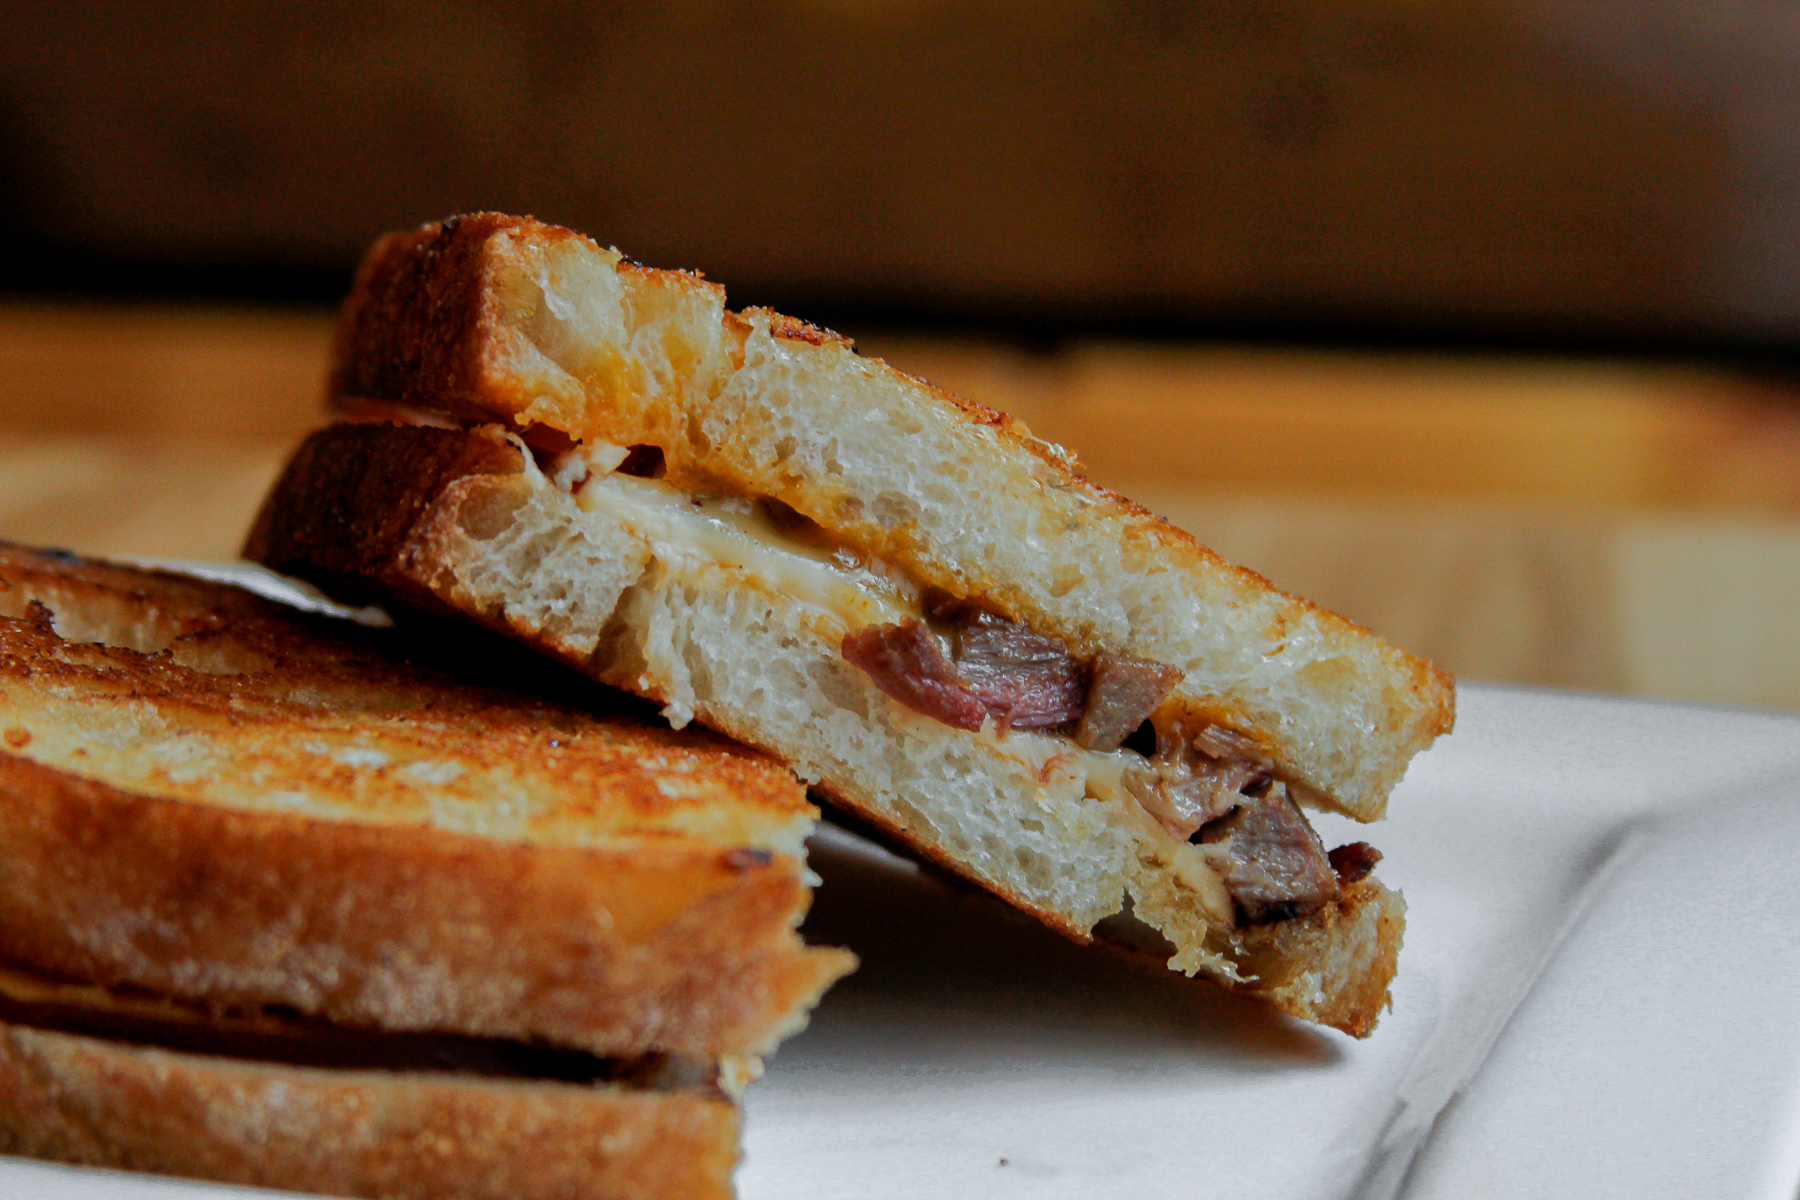 A grilled cheese sandwich with brisket sits on a white plate.